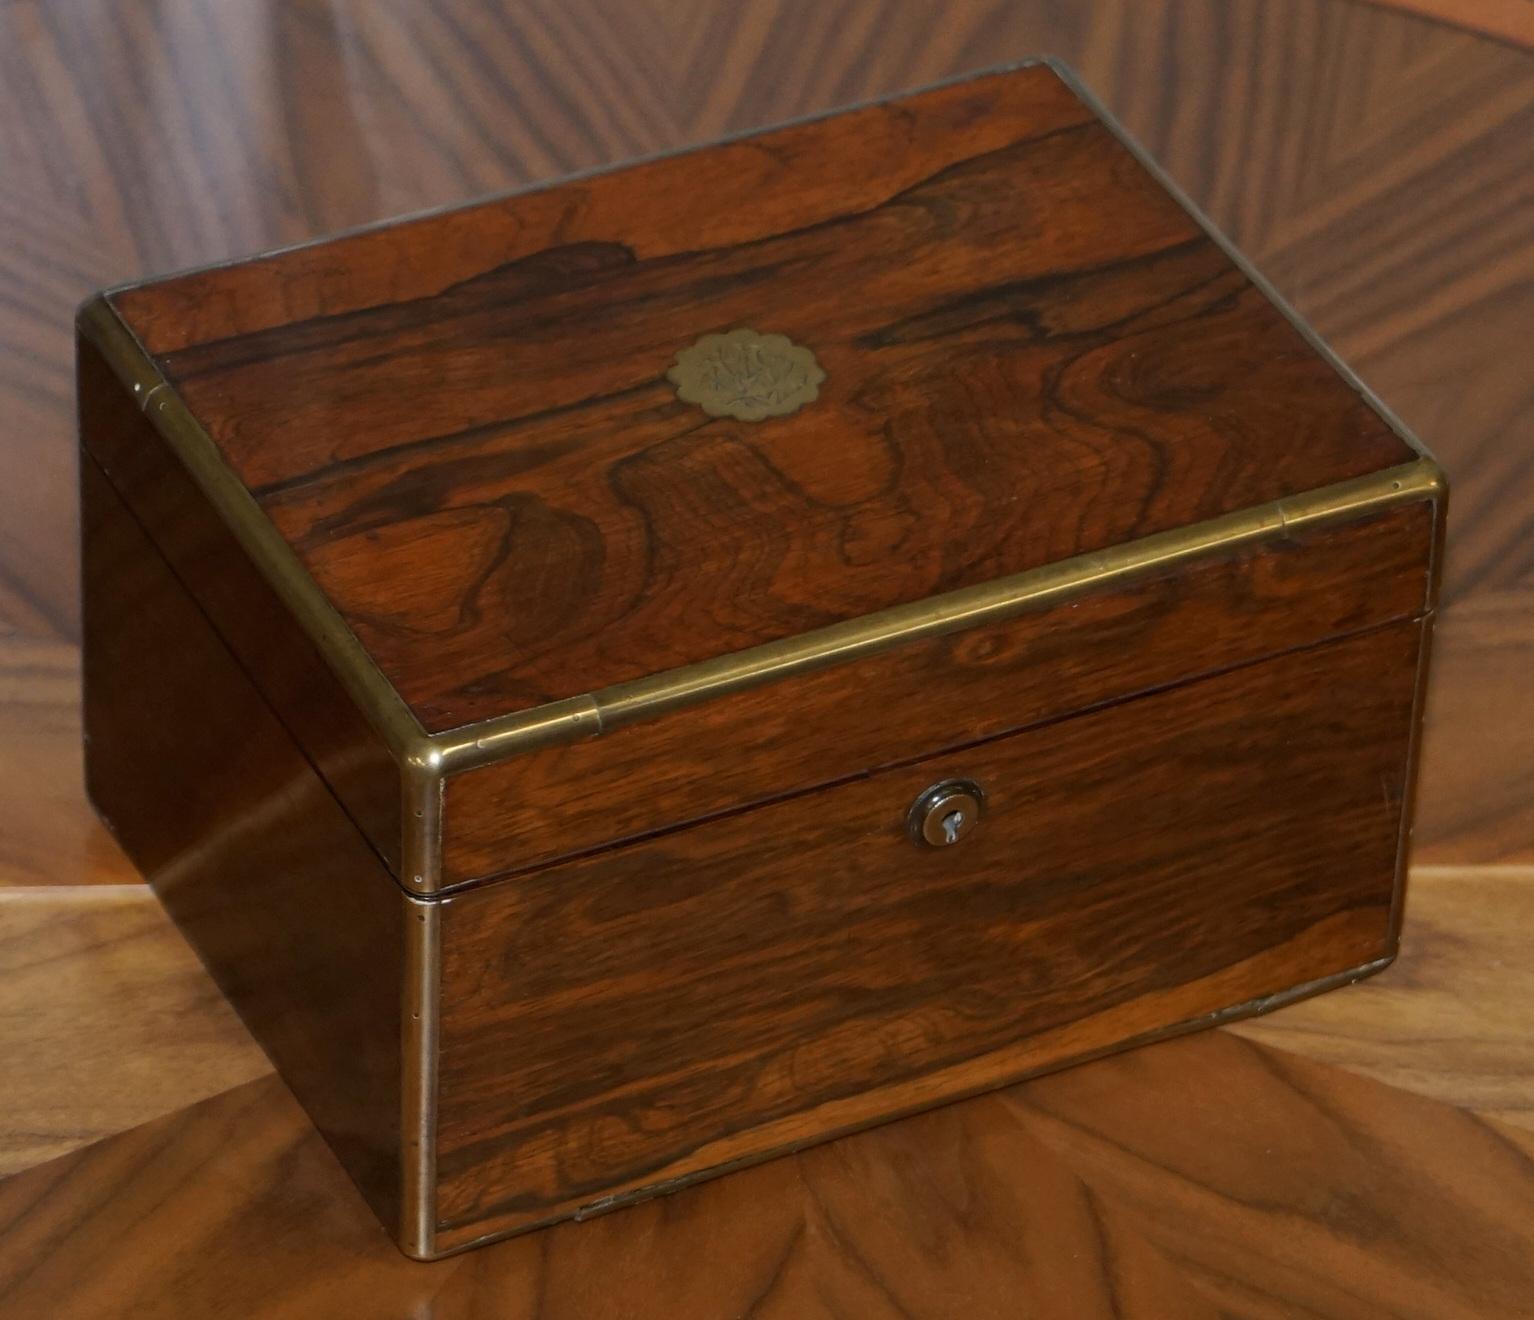 We are delighted to offer for sale this lovely and very rare James Cawston dressing case make gentleman’s military campaign vanity box 1836

A very collectable and rare piece, the case is rosewood which was very popular in the William IV era. The